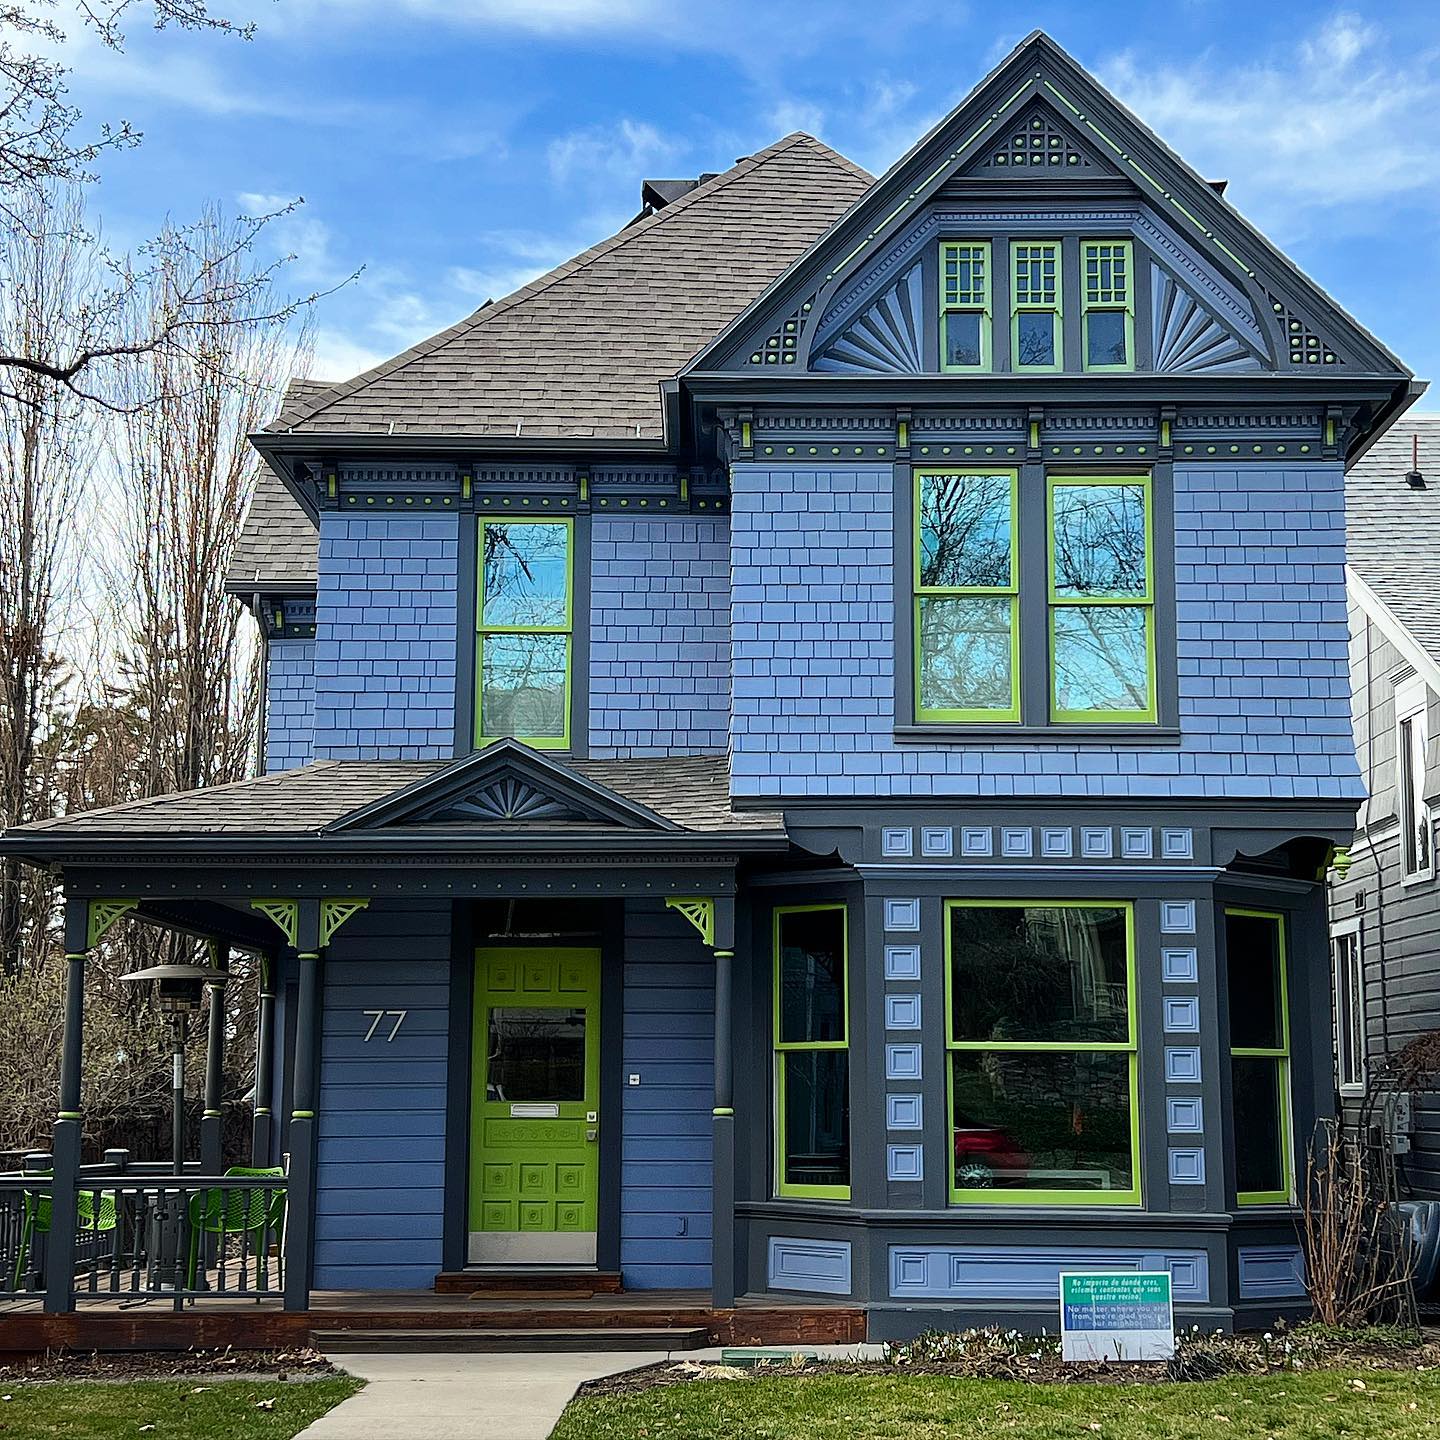 A Victorian home located in SLC's Greater Avenues neighborhood. Photo by Instagram user @lovelyoldhomes